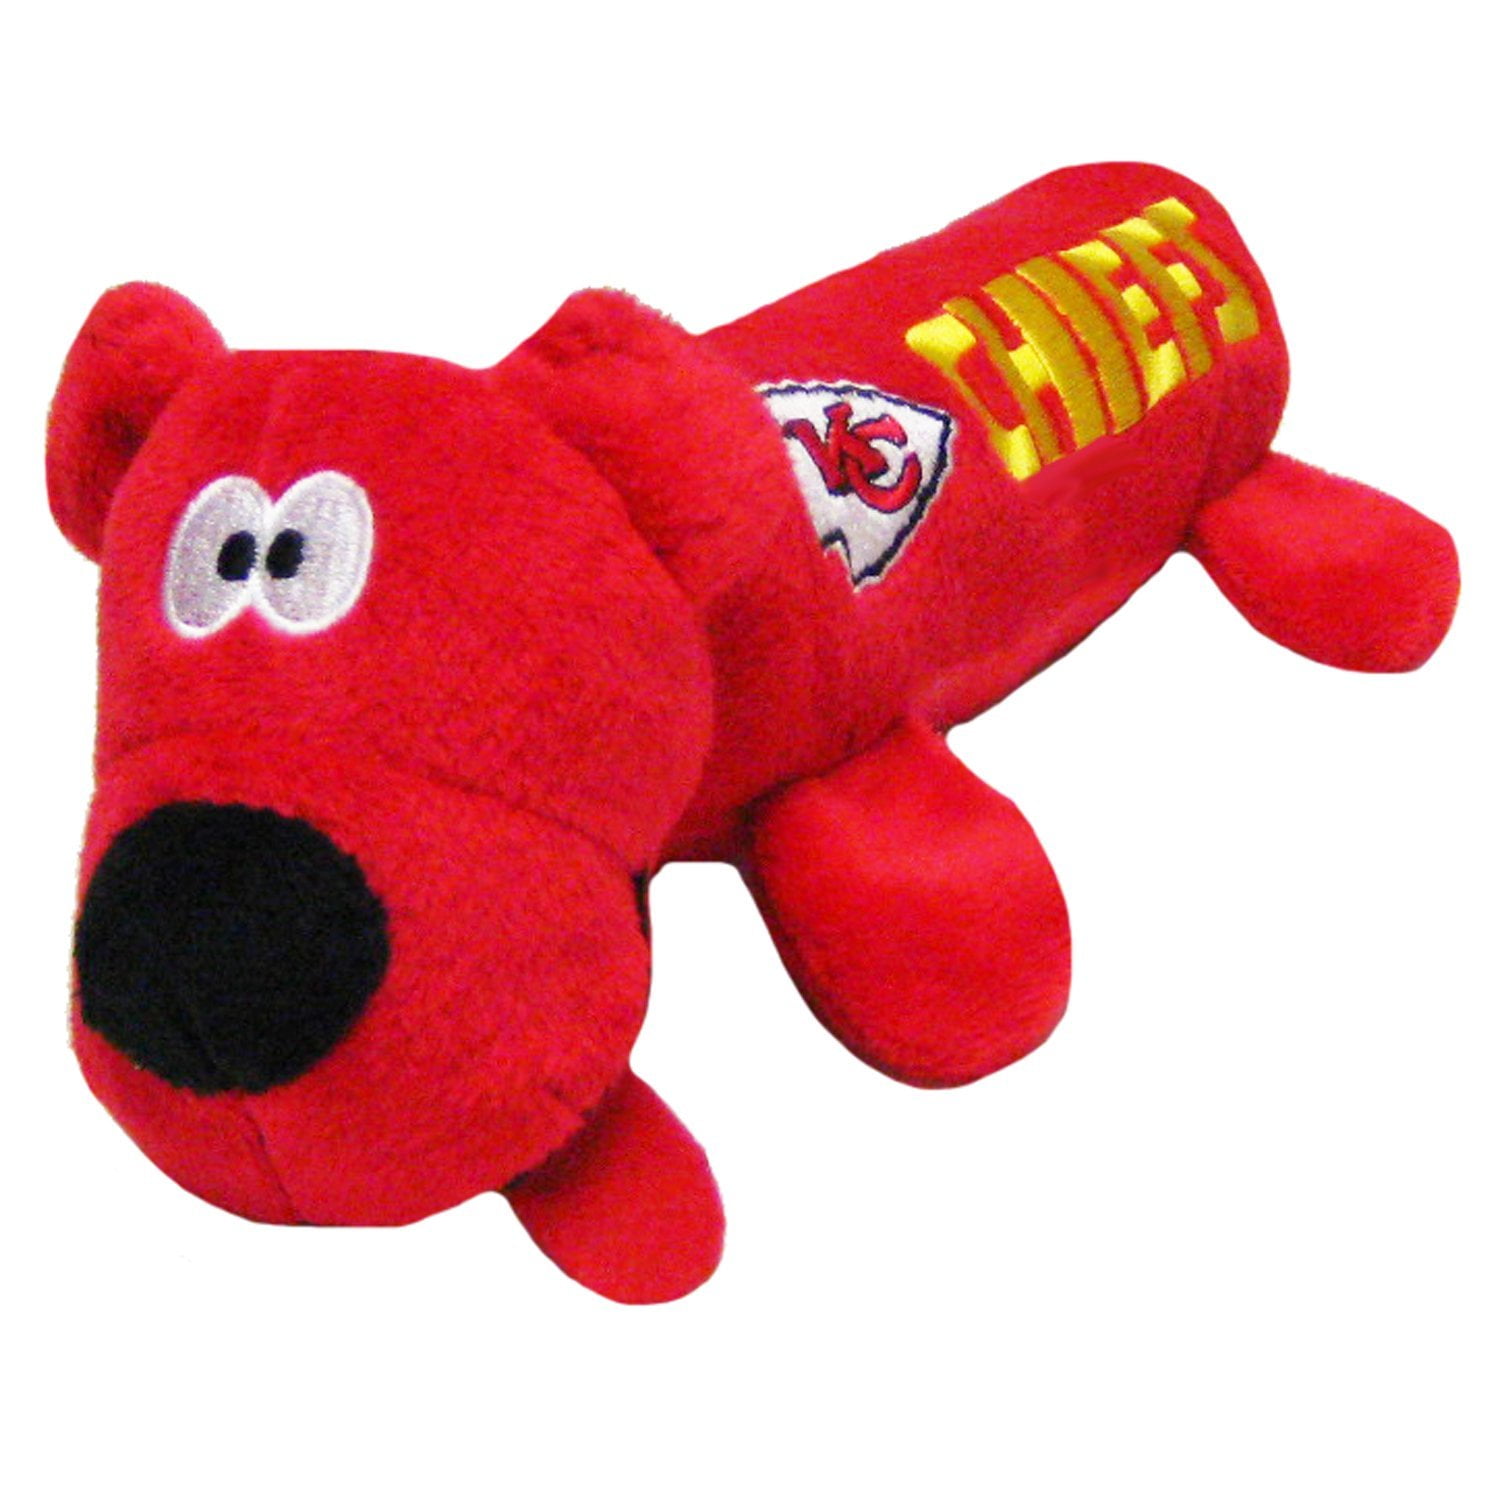 The 1st Ever Tough but Smooth Dog Toy NFL Kansas City Chiefs Football  Jersey Tough Pet Toy. A Premium Quality Doggie Toy with Built-in Squeaker.